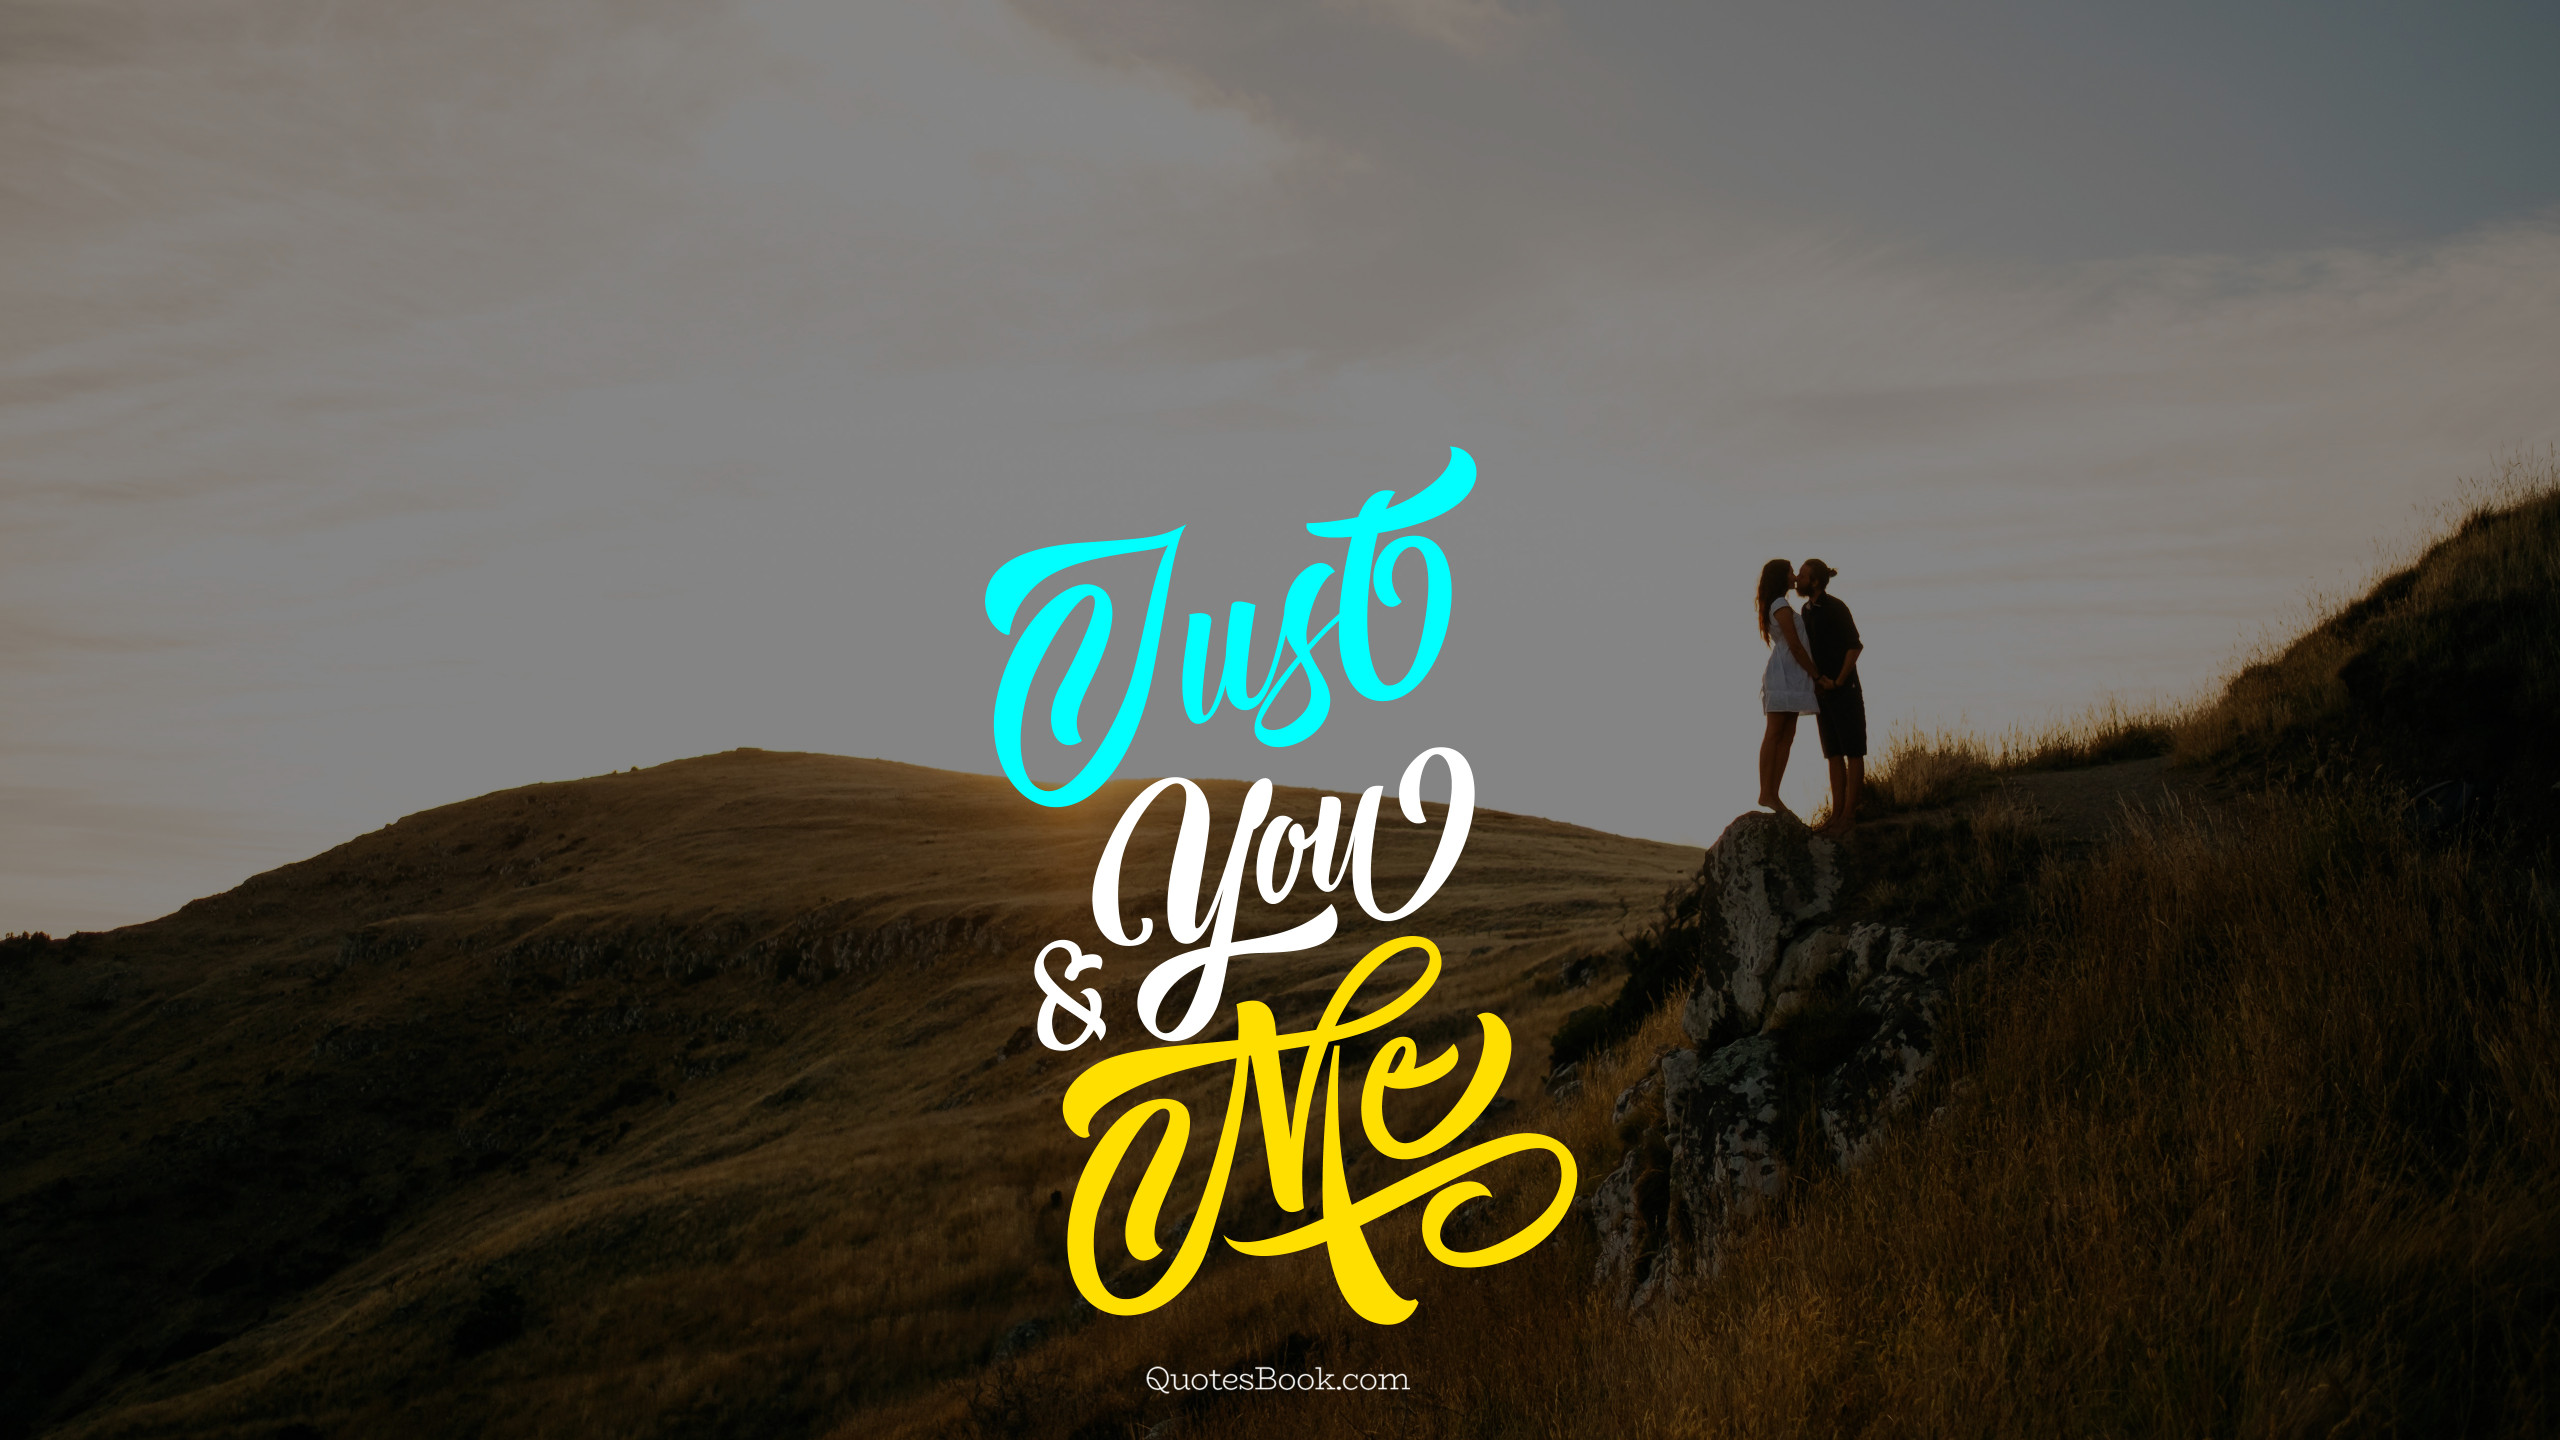 Just you and me - QuotesBook